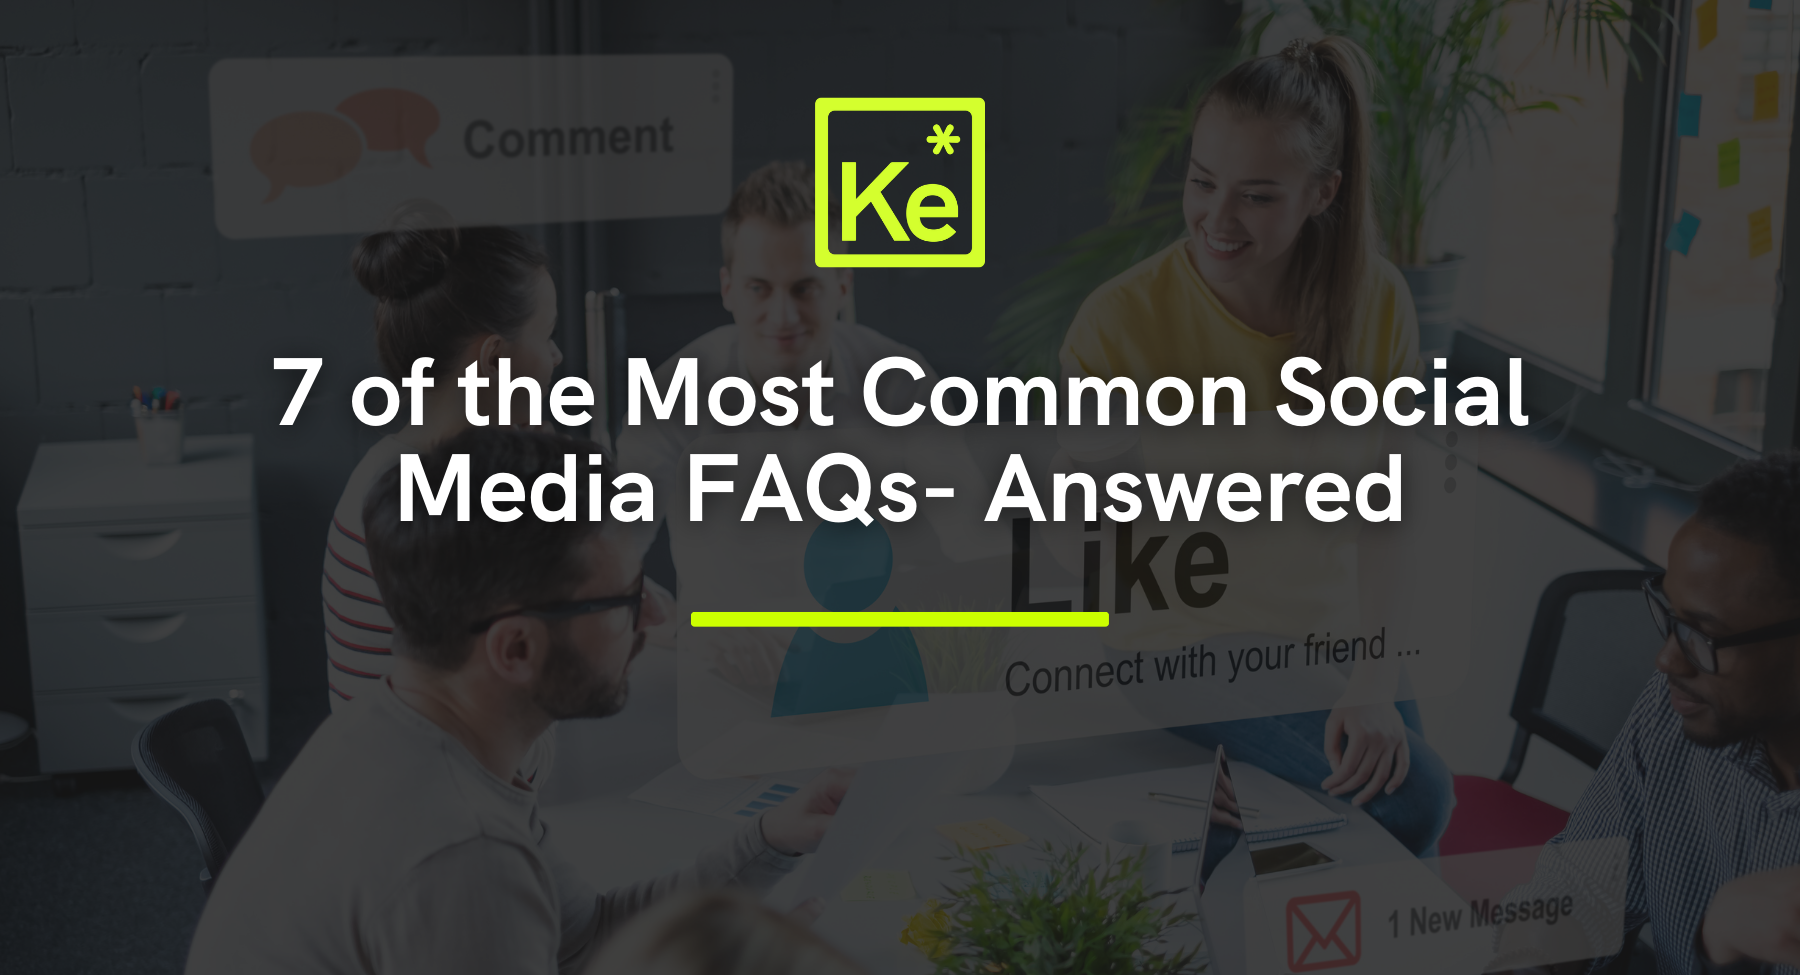 7 of the Most Common Social Media FAQs- Answered